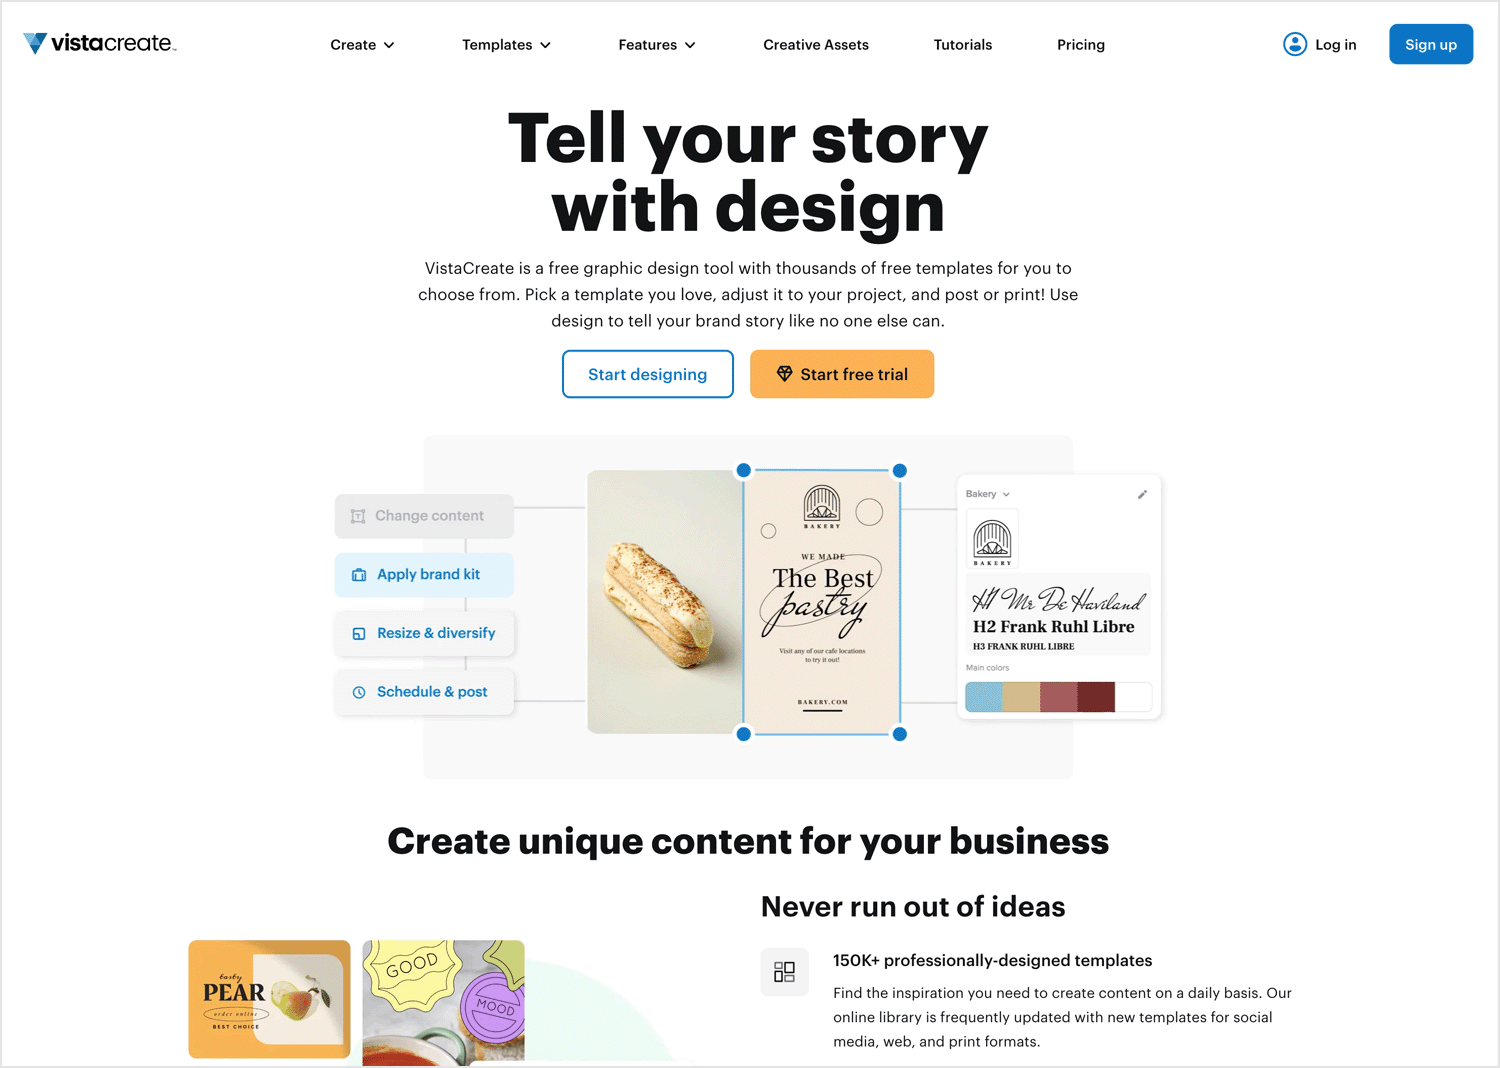 VistaCreate homepage offering free graphic design tools, templates, and vectors.